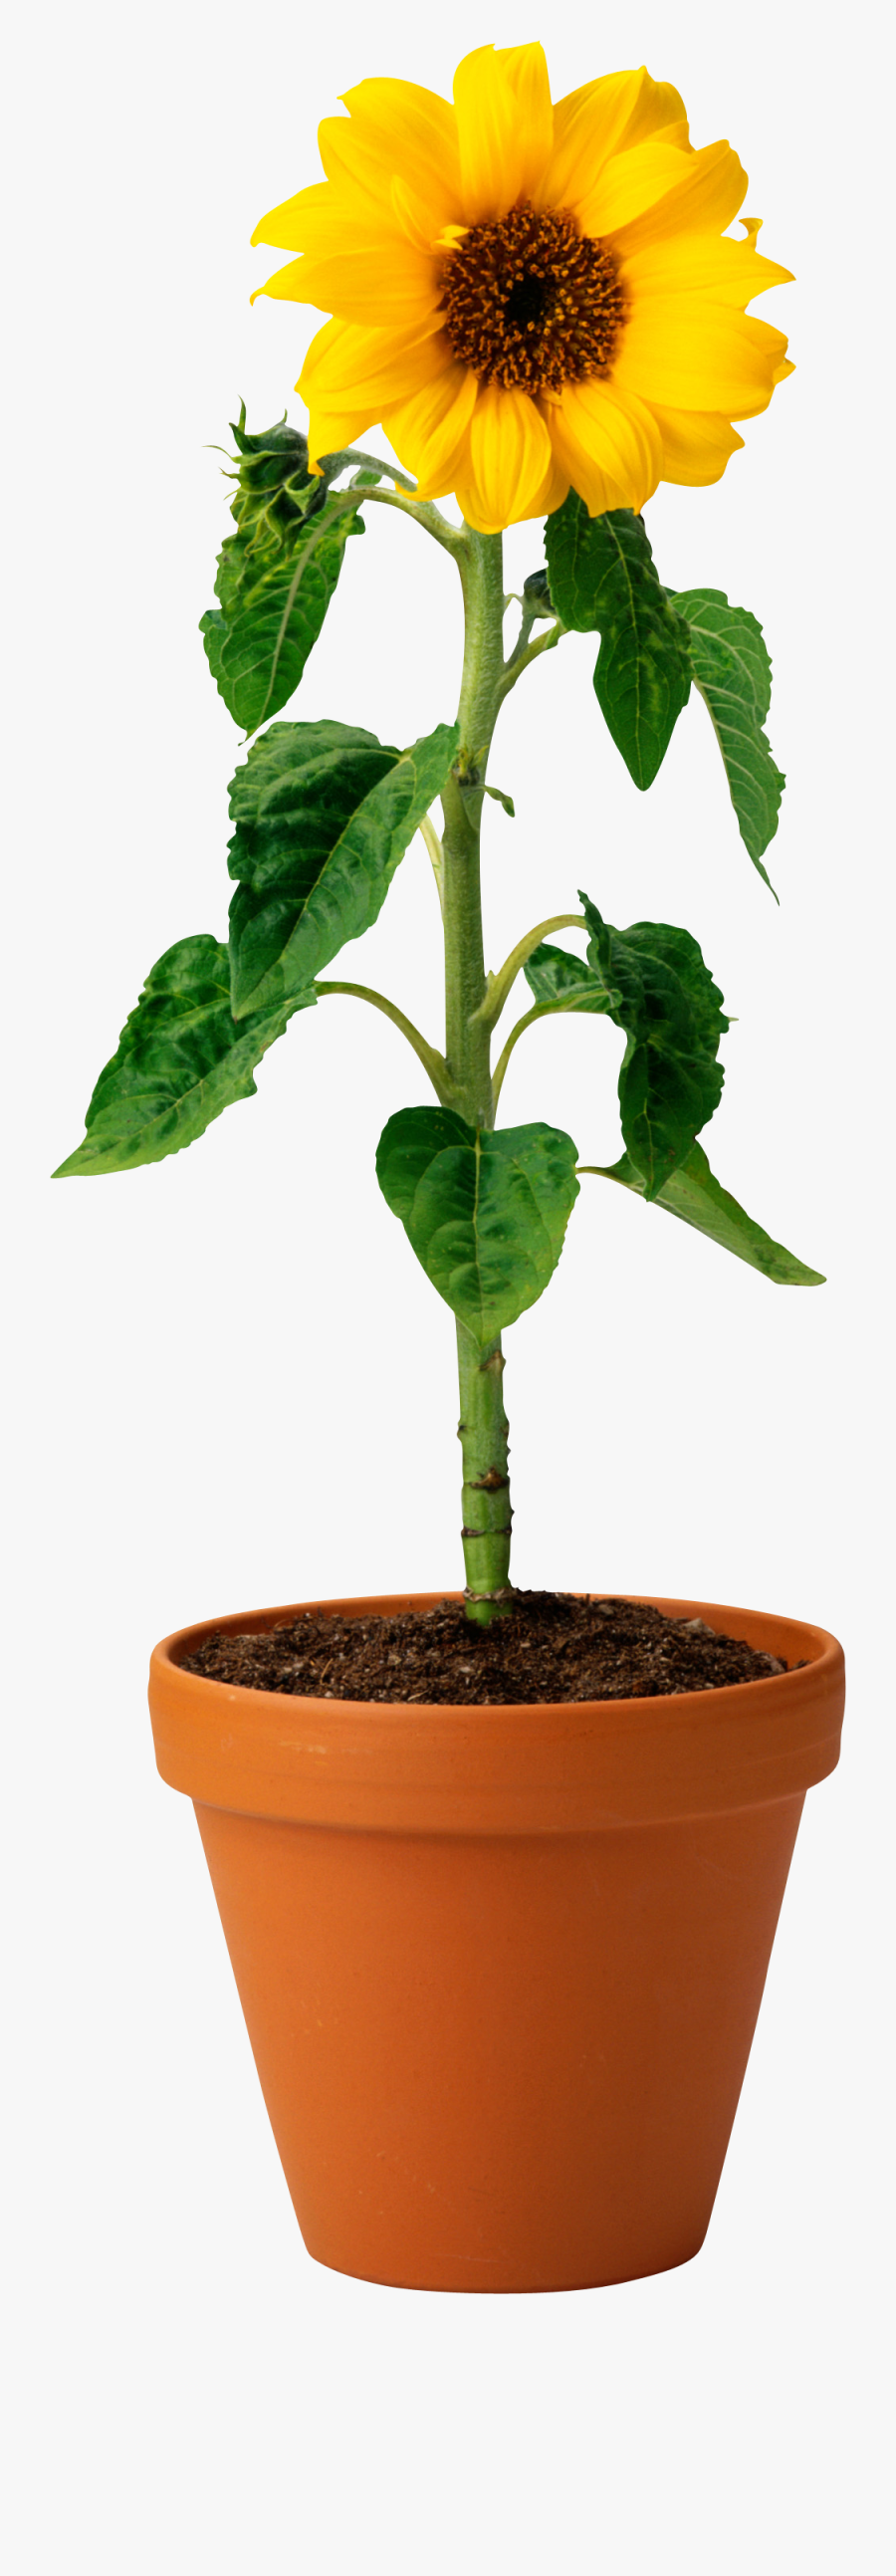 Sunflower In Pot Png, Transparent Clipart